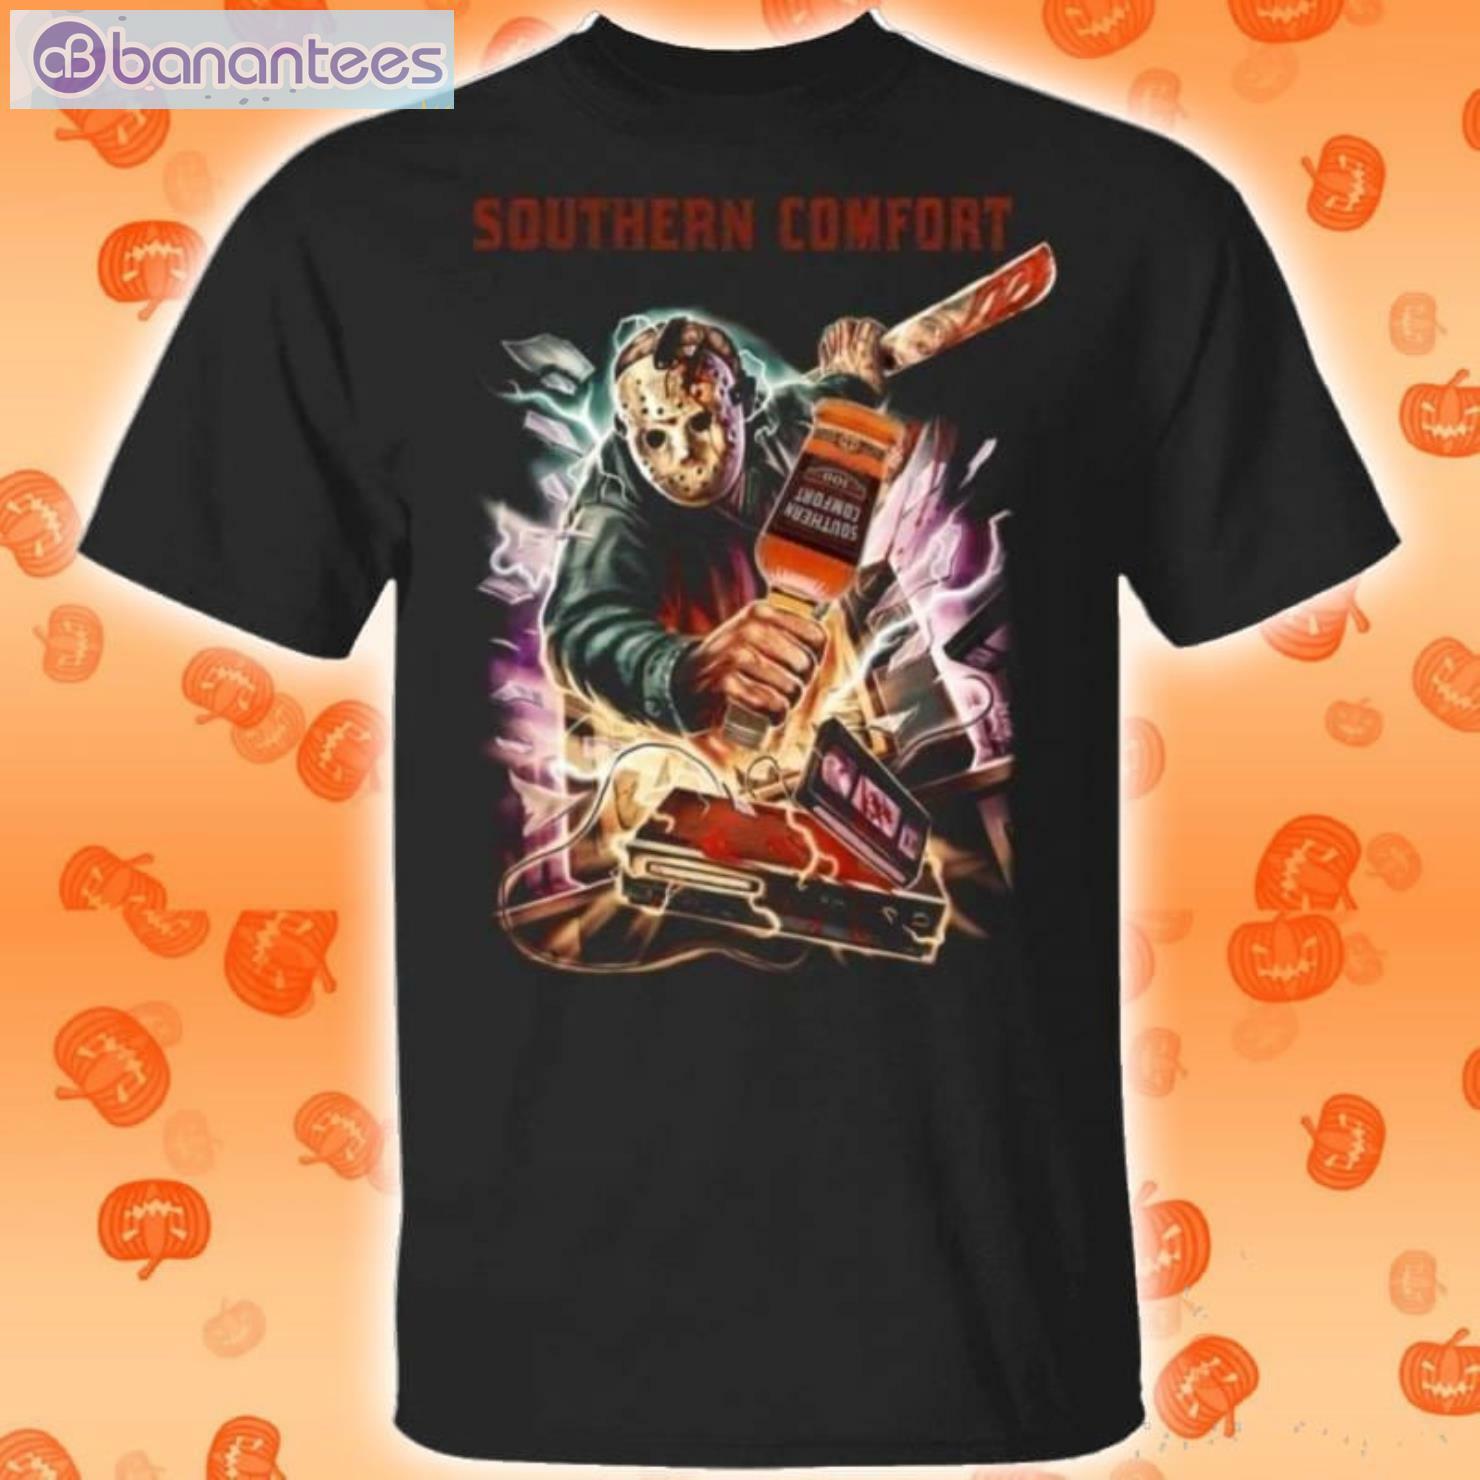 Jason Voorhees And Southern Comfort Whisky Halloween T-Shirt Product Photo 1 Product photo 1